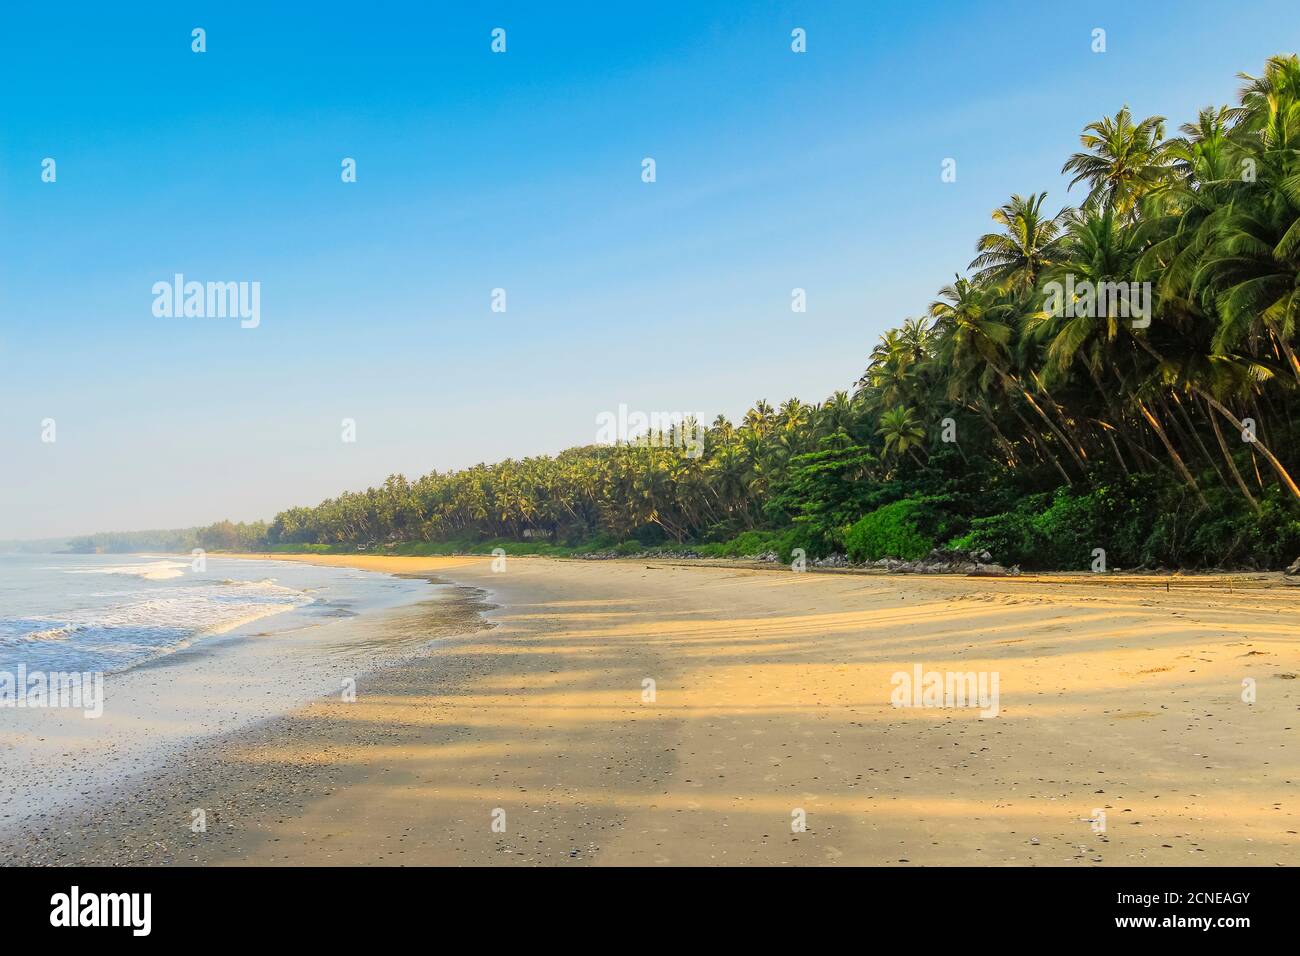 Leaning palm trees at lovely unspoilt deserted Kizhunna Beach, south of Kannur on the state's North coast, Kannur, Kerala, India, Asia Stock Photo